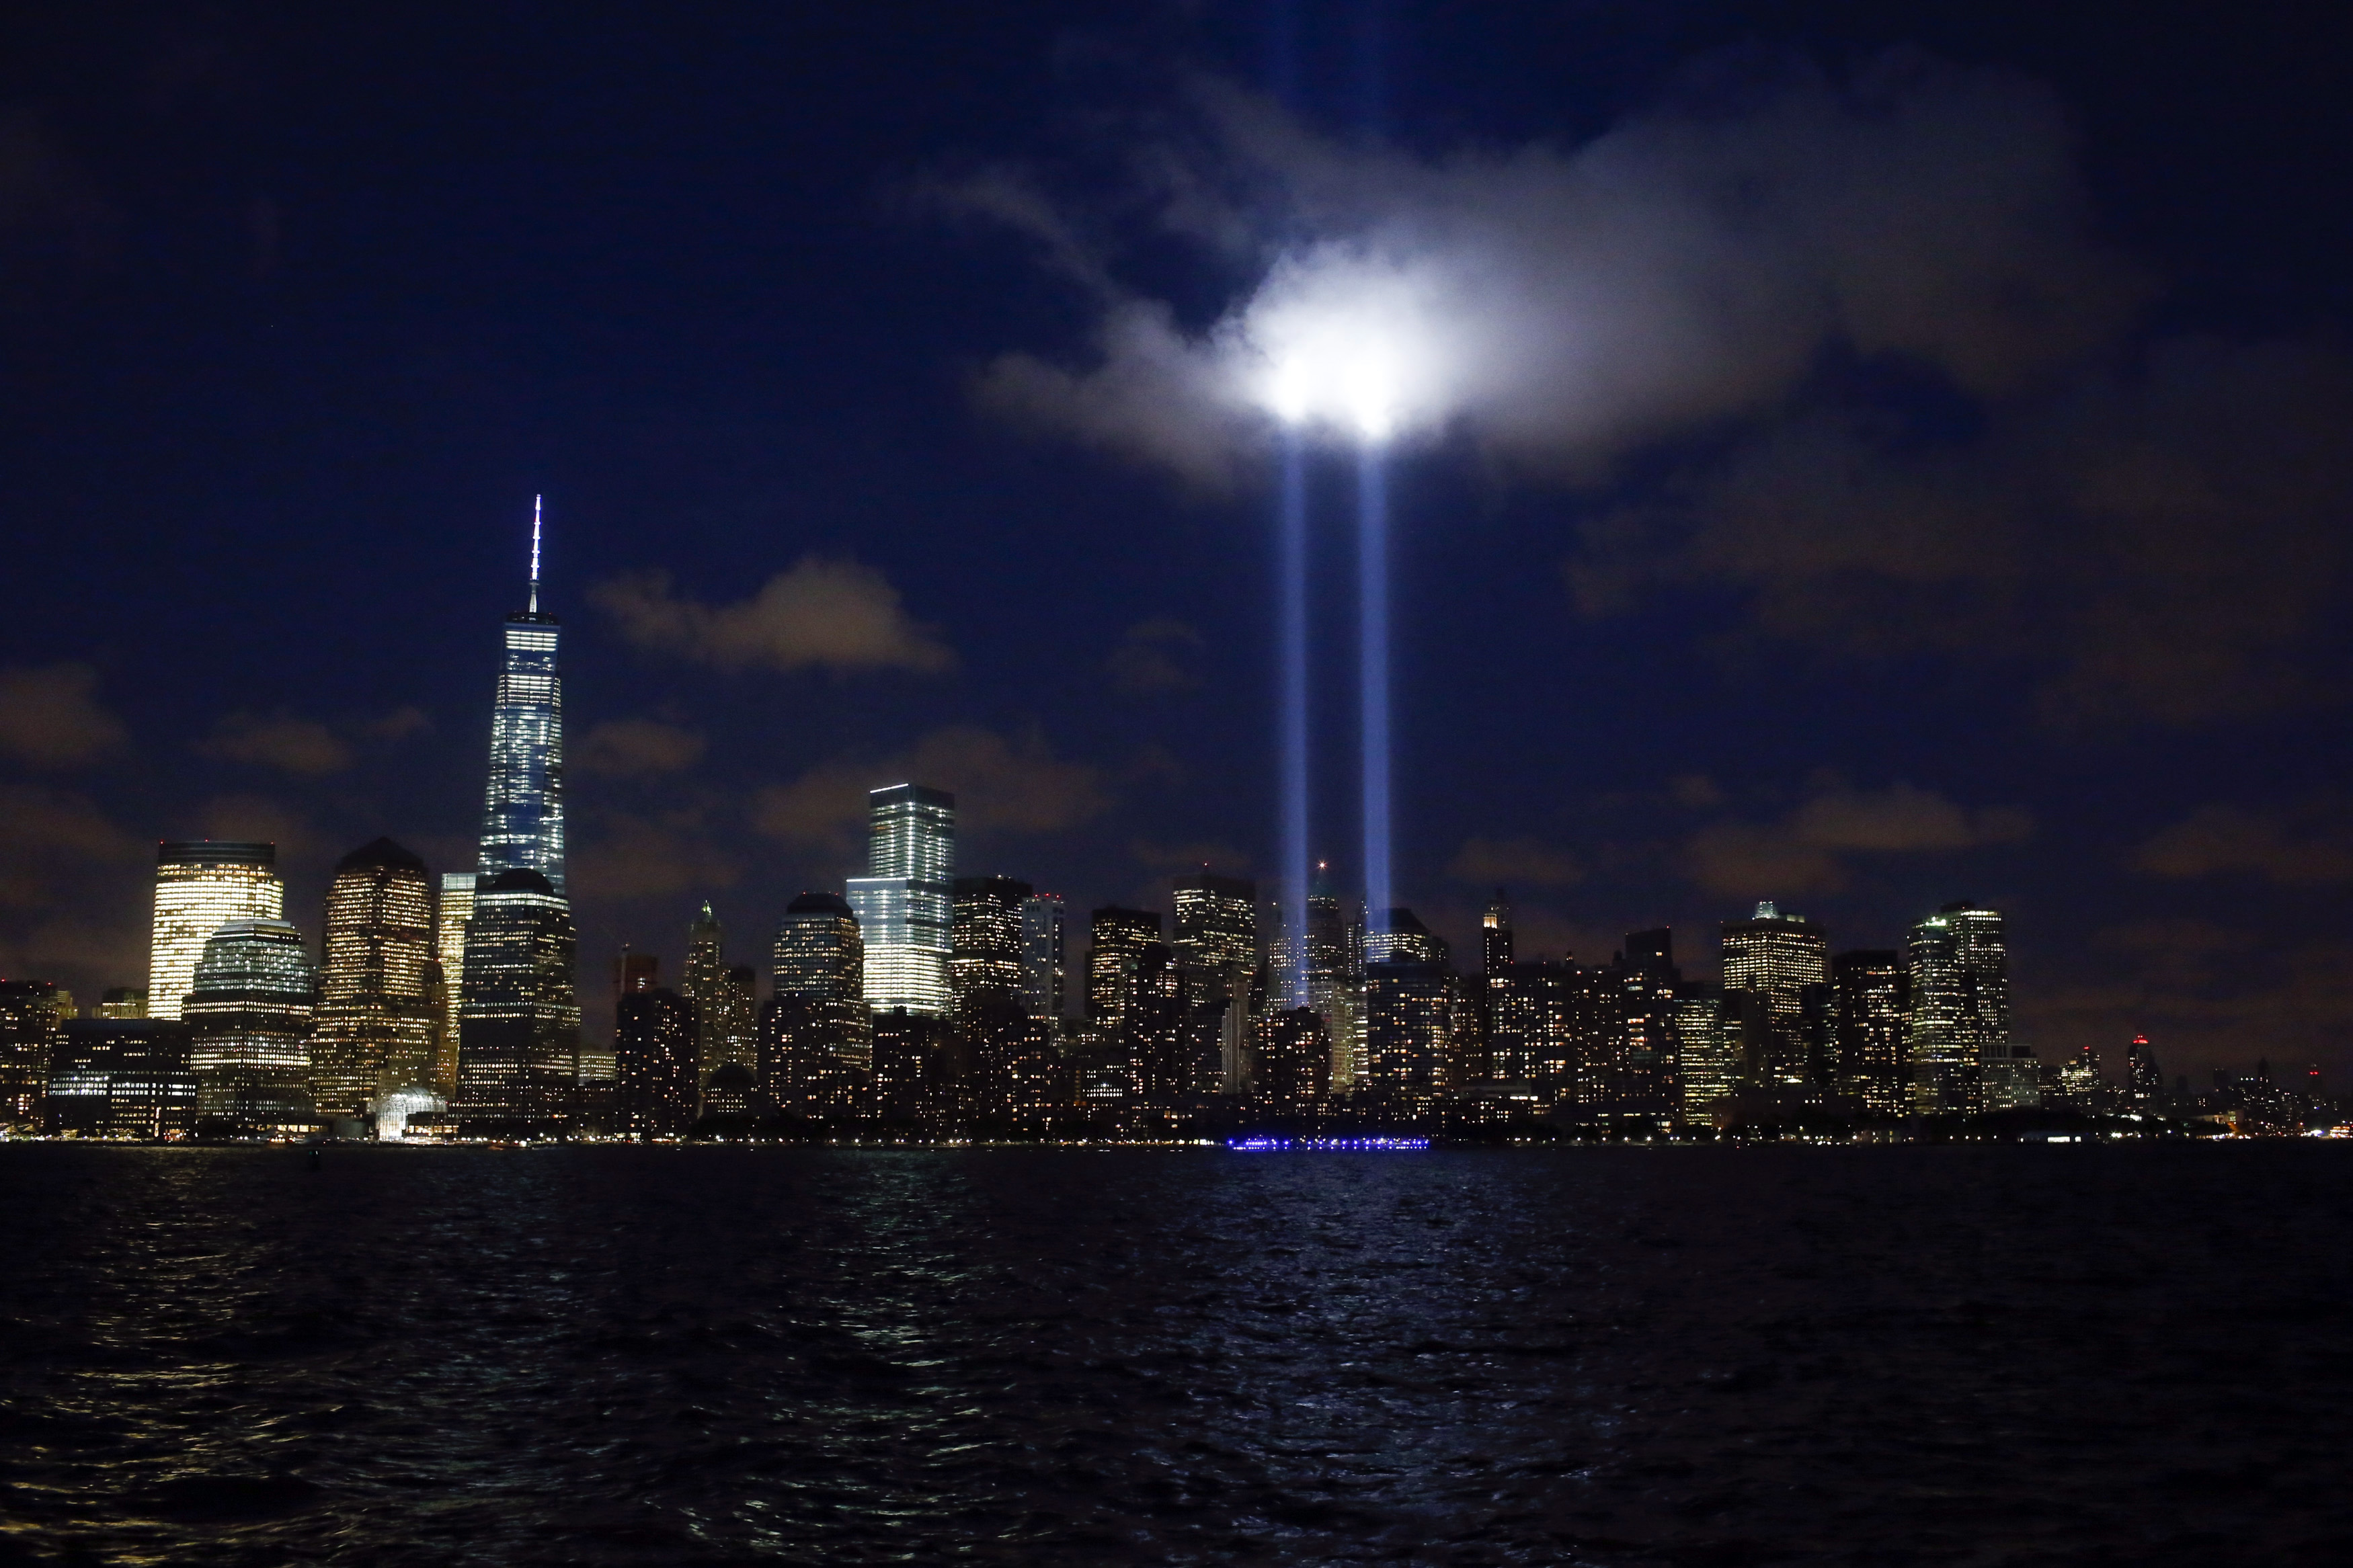 The Tribute in Light illuminated on the skyline of lower Manhattan in 2014.